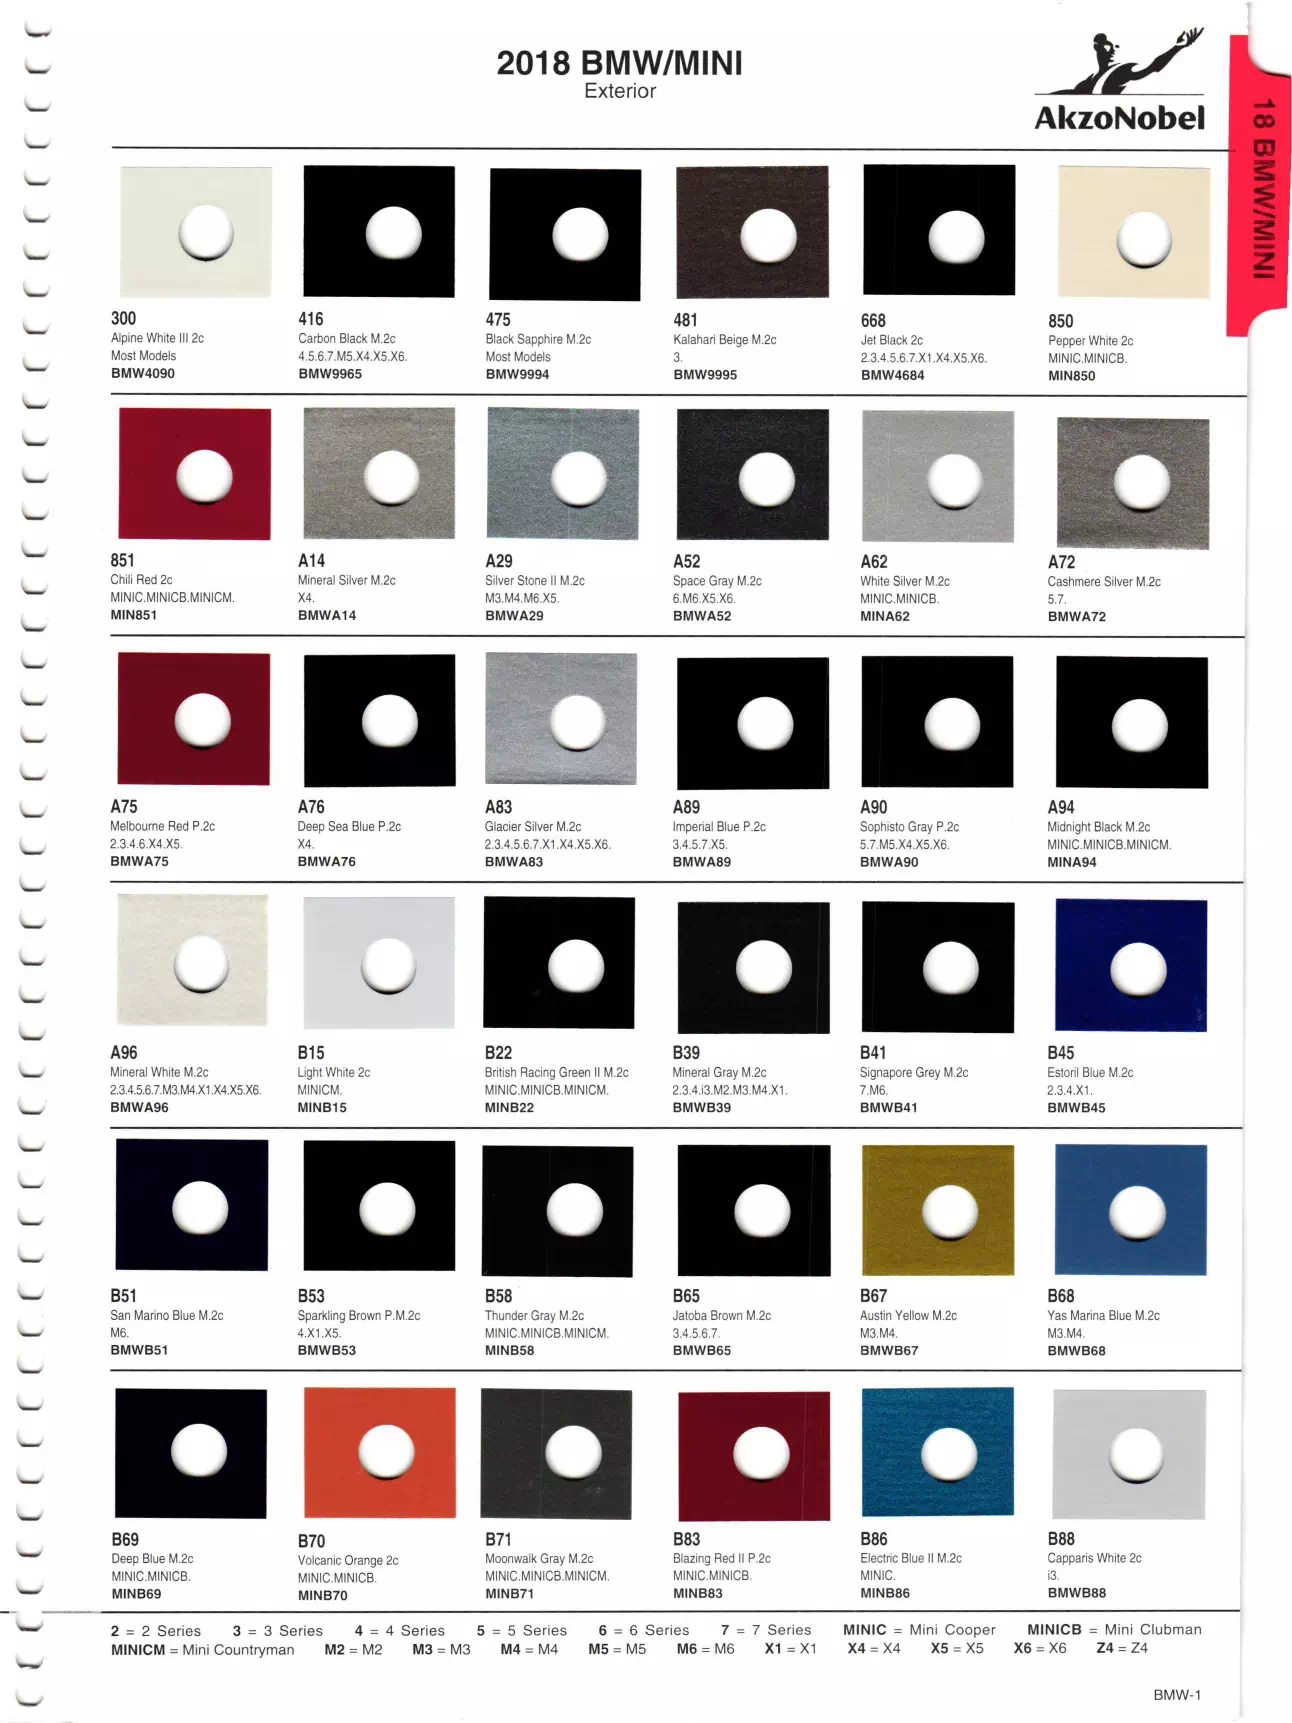 Exterior, Accent, Wheel & underhood Colors used by BMW and Mini Cooper Vehicles in 2018